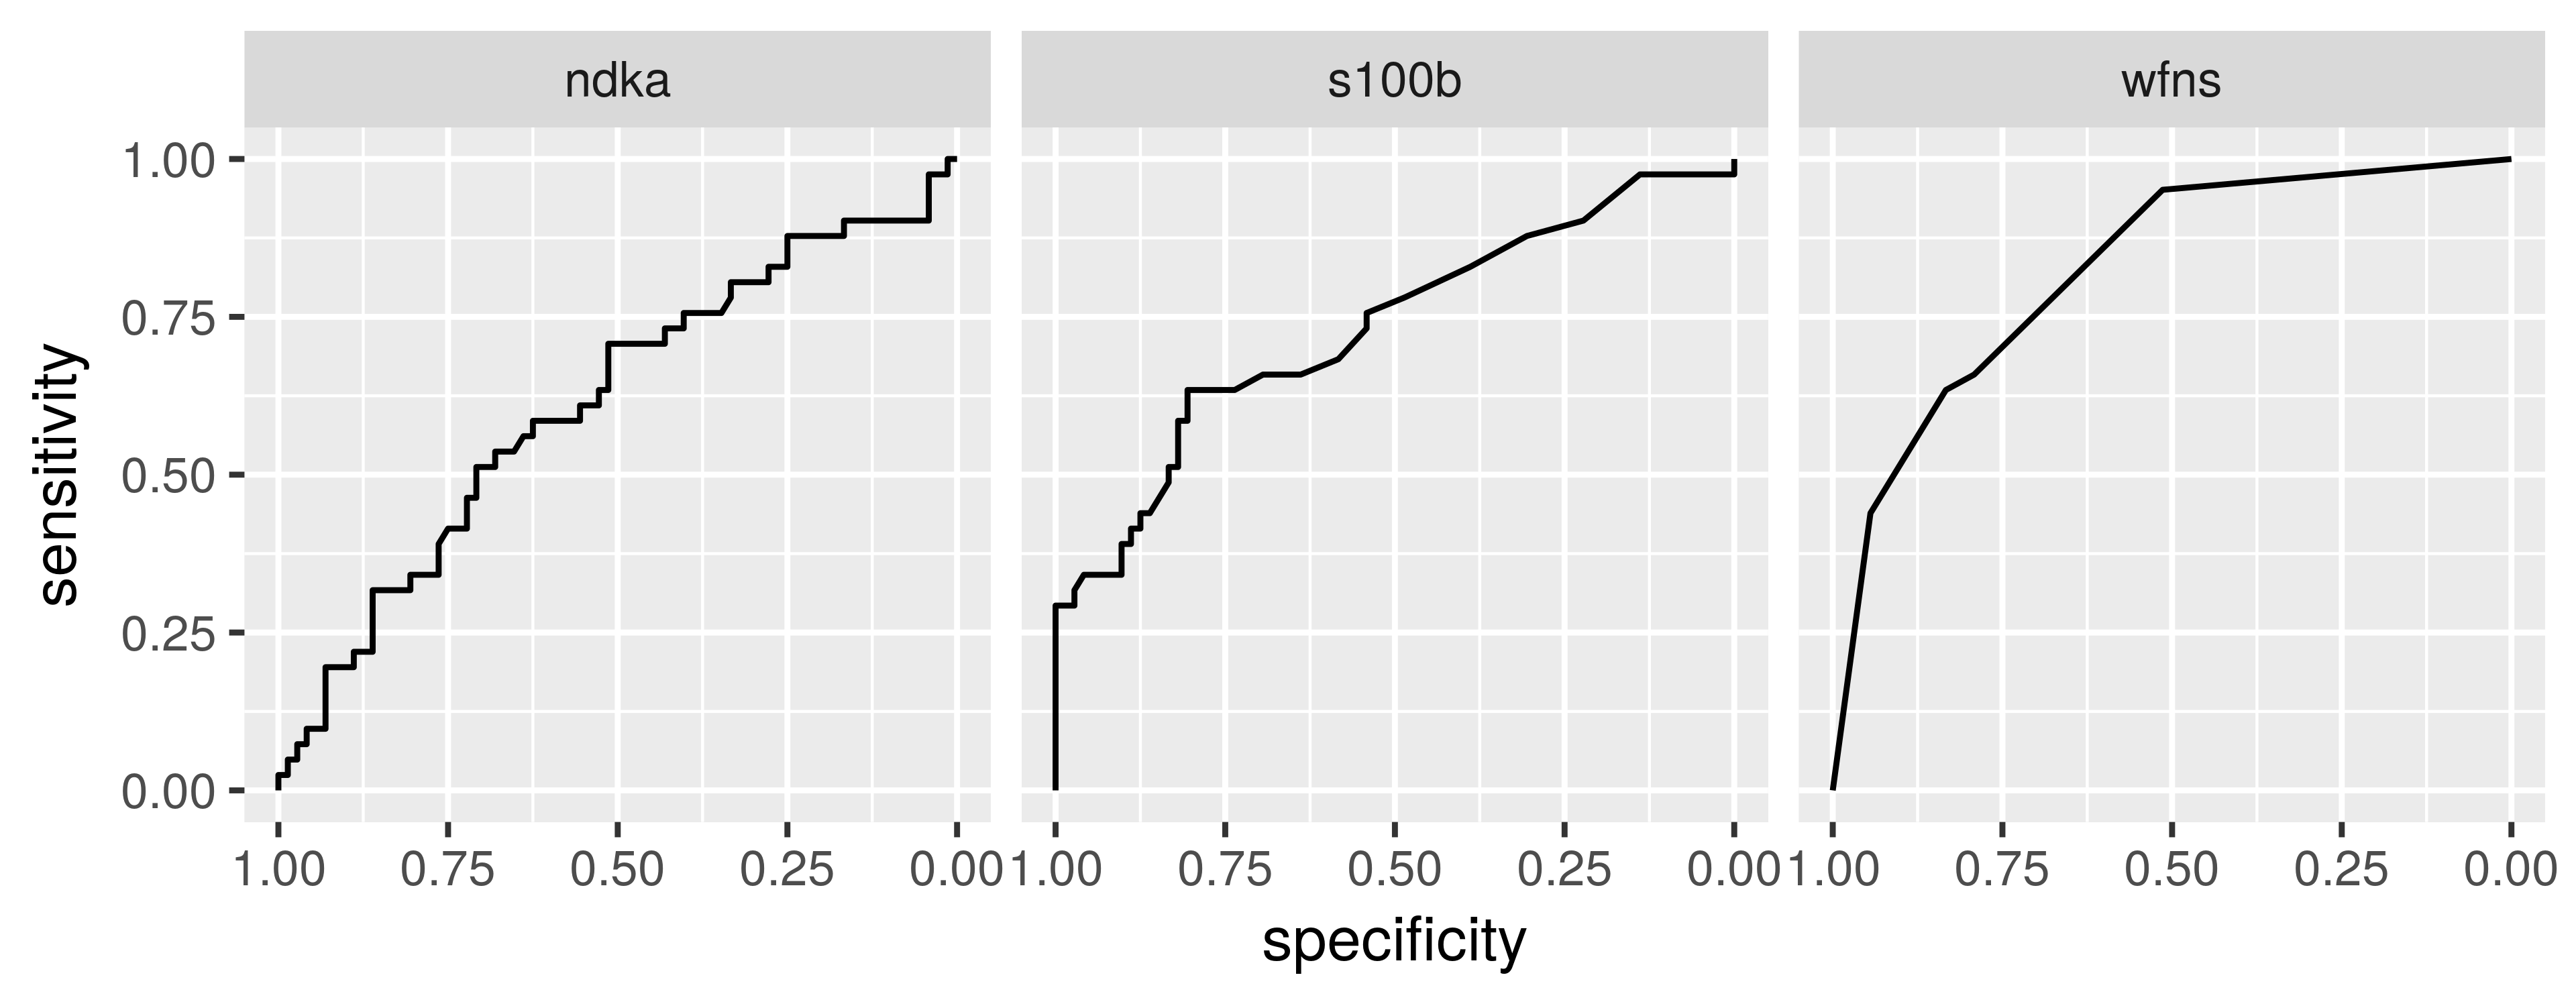 3 ROC curves in a facetted ggplot2 panel